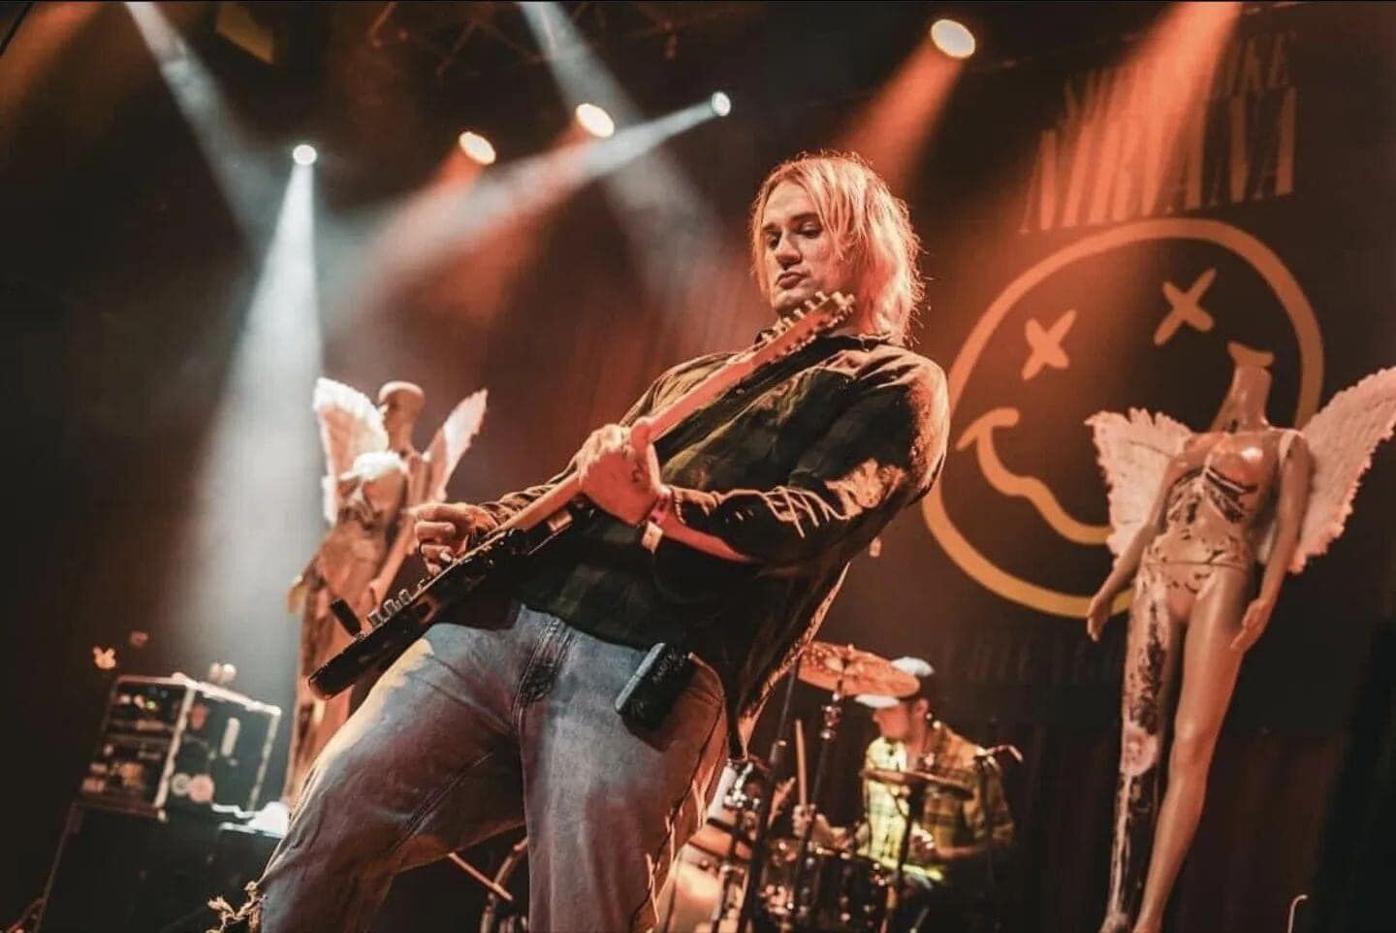 Smells Like Nirvana: A Tribute To Nirvana schedule, dates, events, and  tickets - AXS